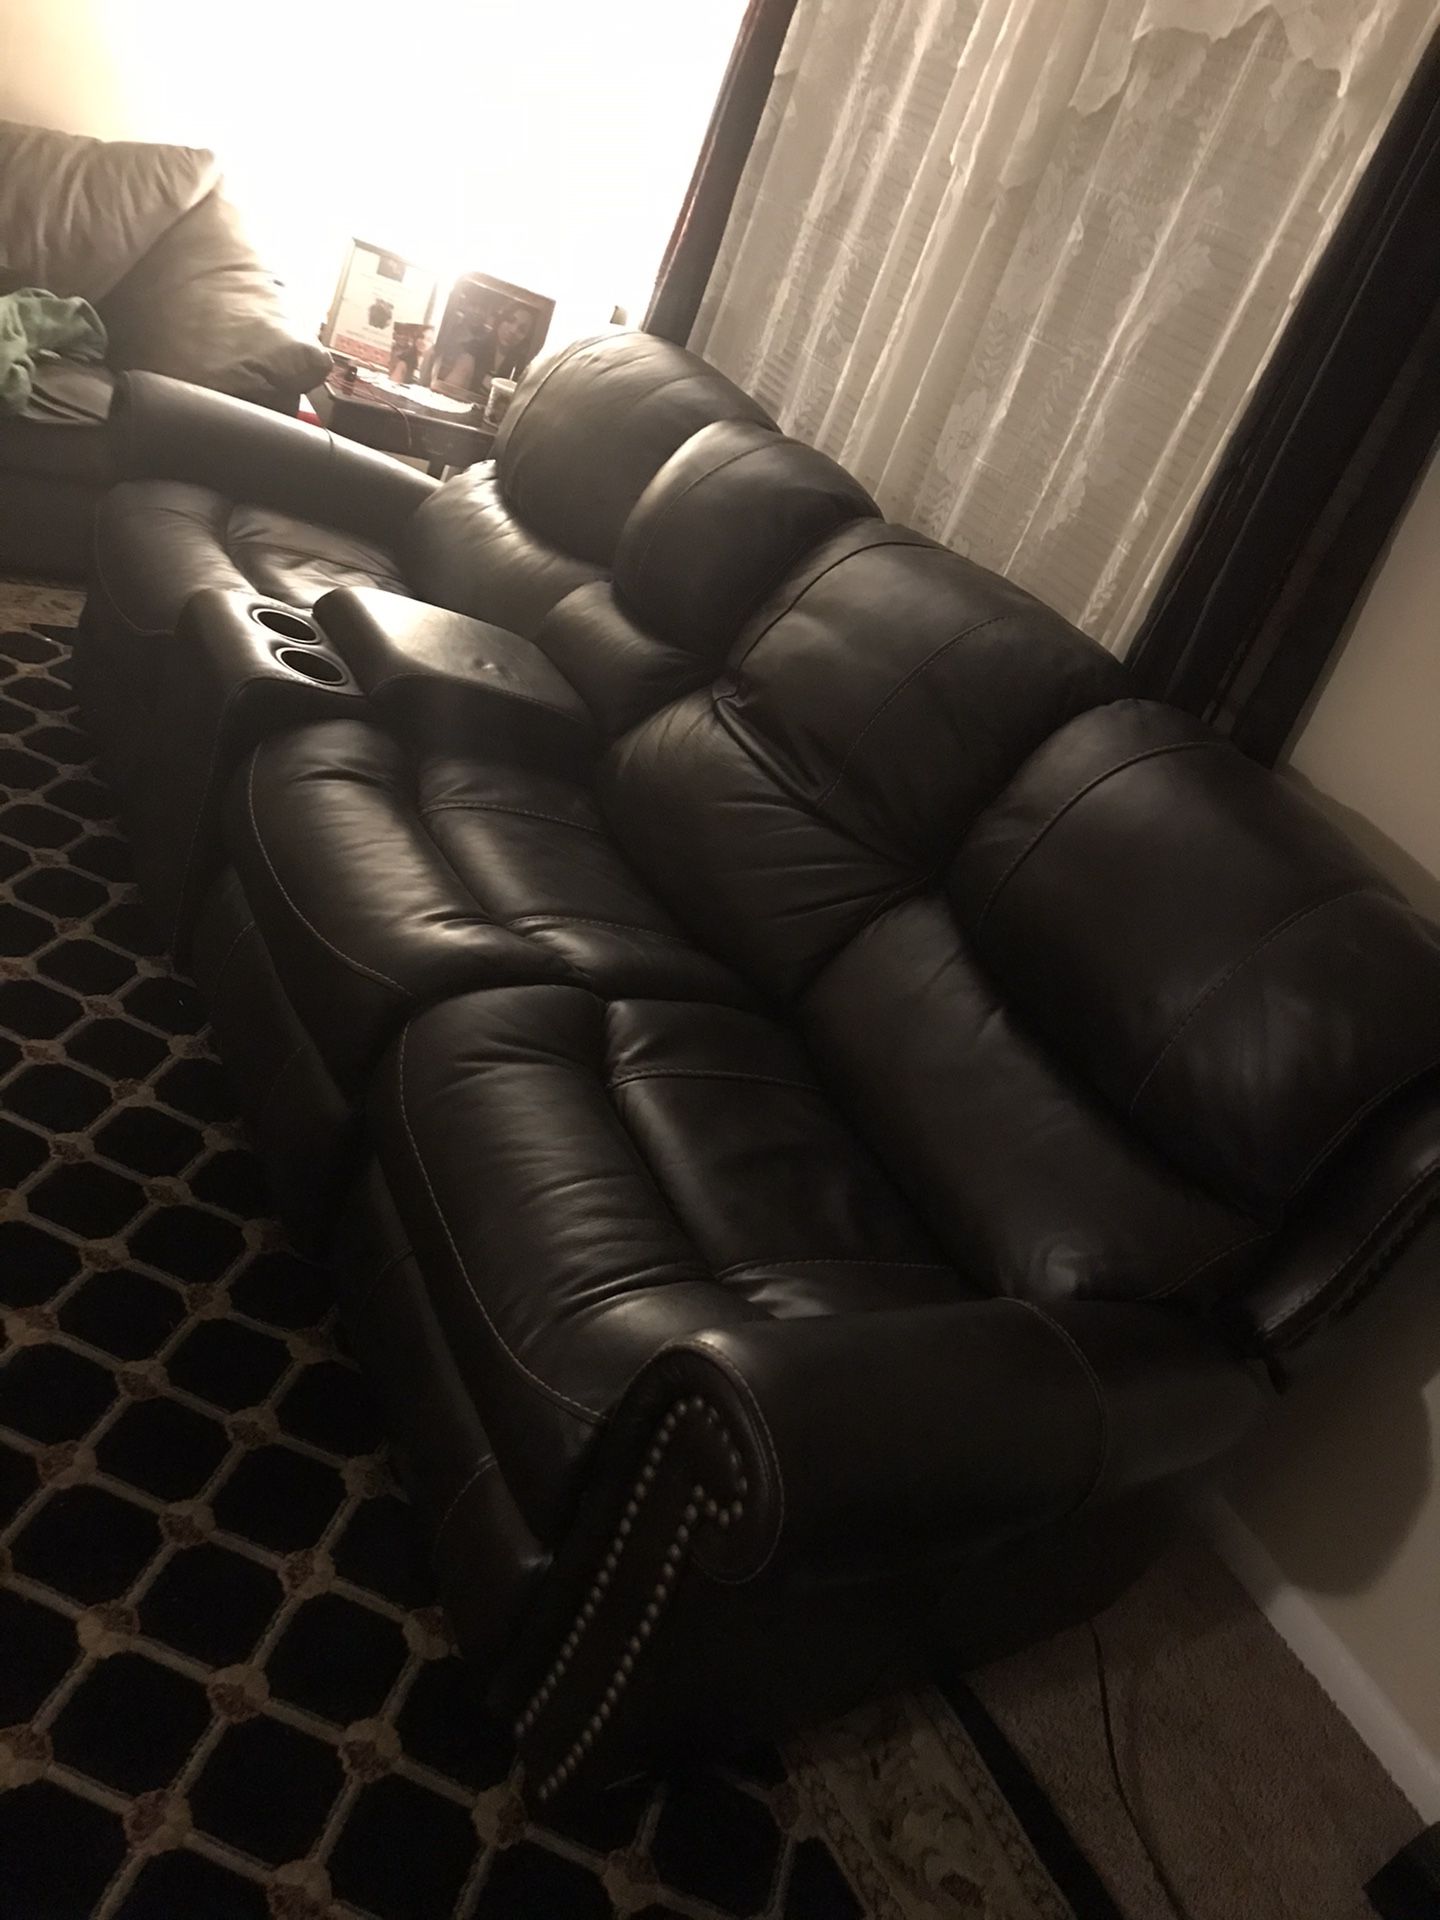 $250 COMFY Double Recliner Rooms To Go Sofa!!